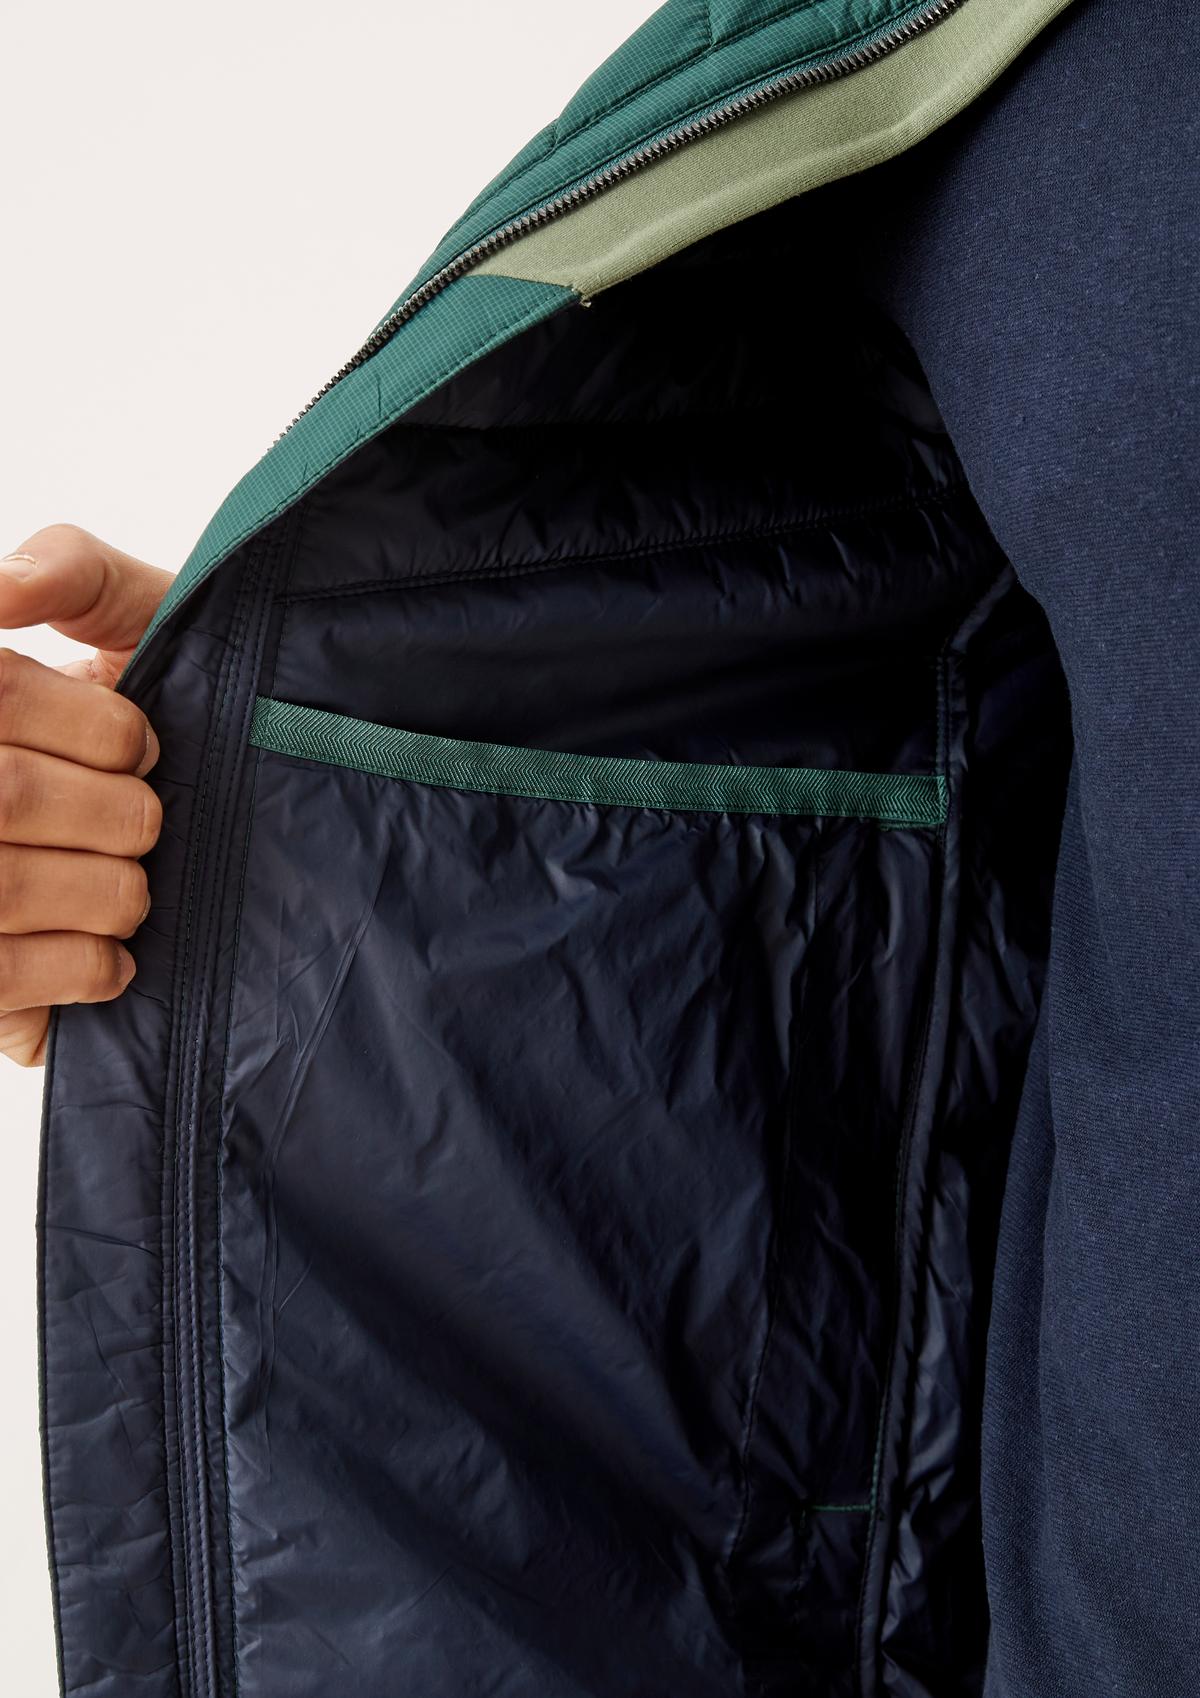 s.Oliver Jacket with 3M Thinsulate™ padding